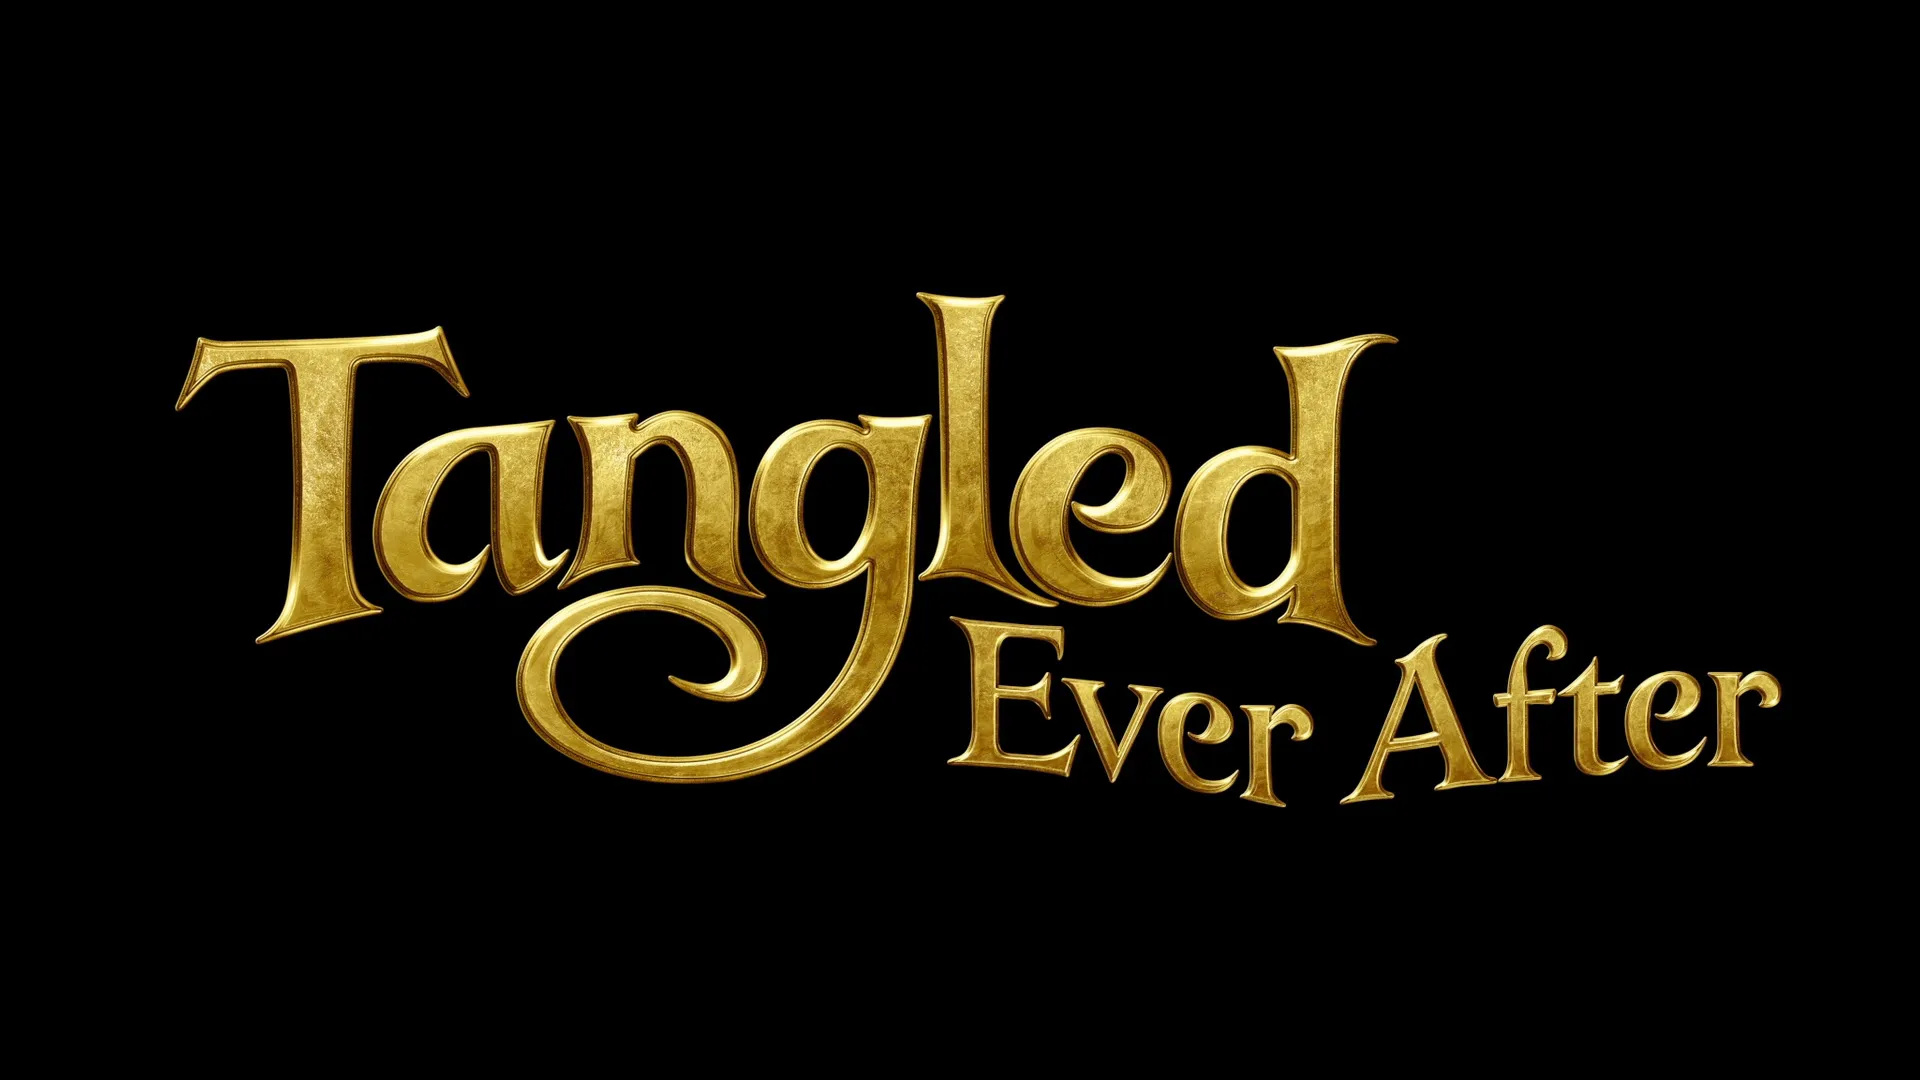 Tangled Ever After, Animation screencaps, Tangled Ever After, 1920x1080 Full HD Desktop